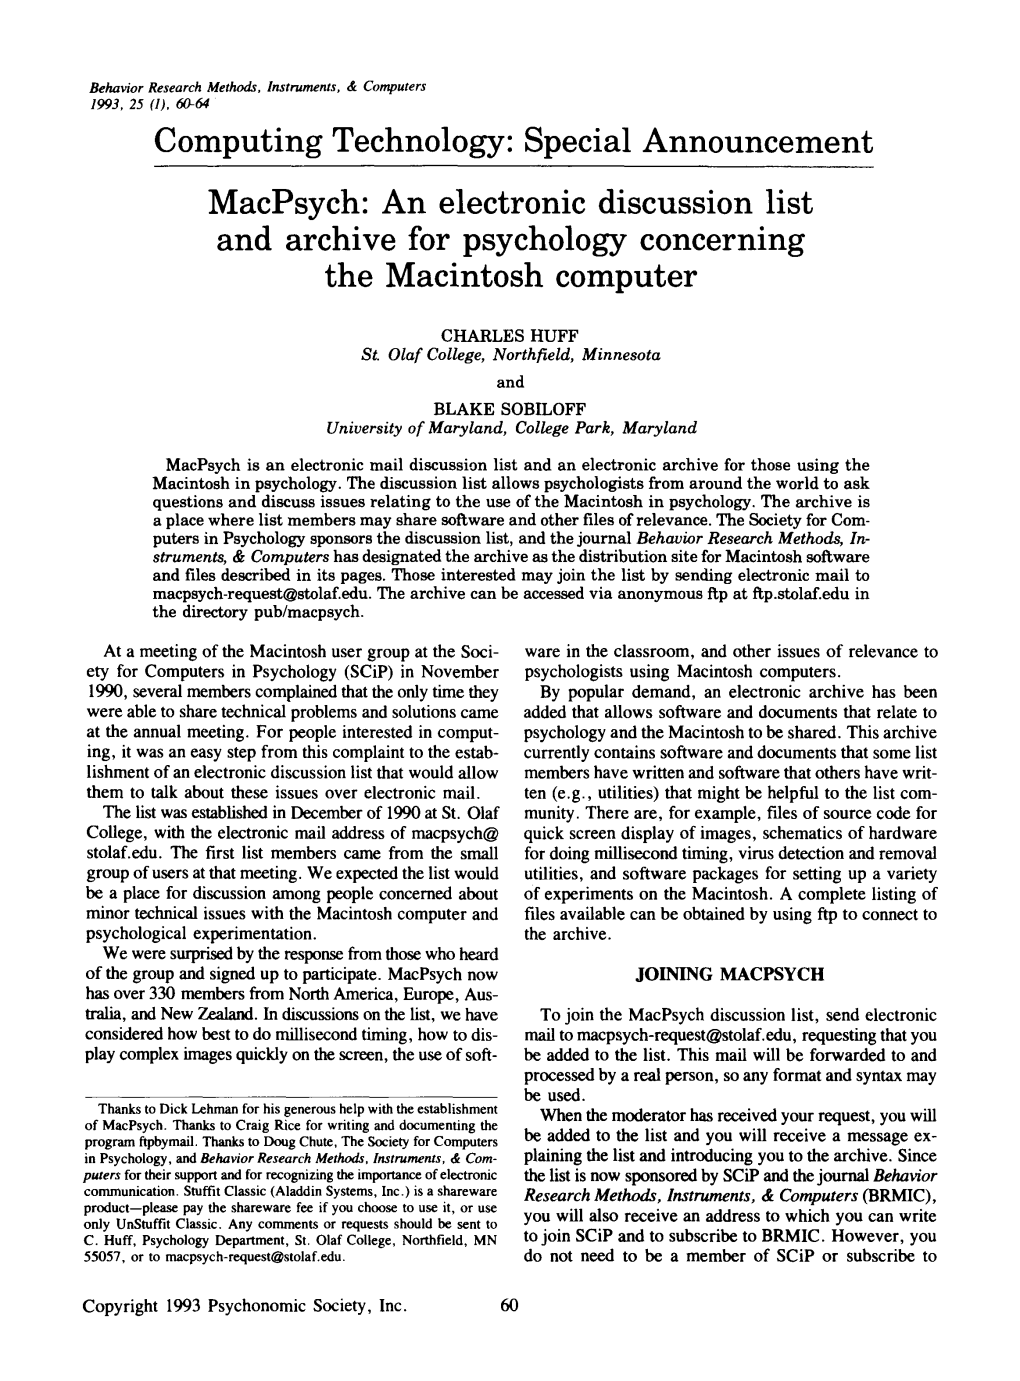 Macpsych: an Electronic Discussion List and Archive for Psychology Concerning the Macintosh Computer